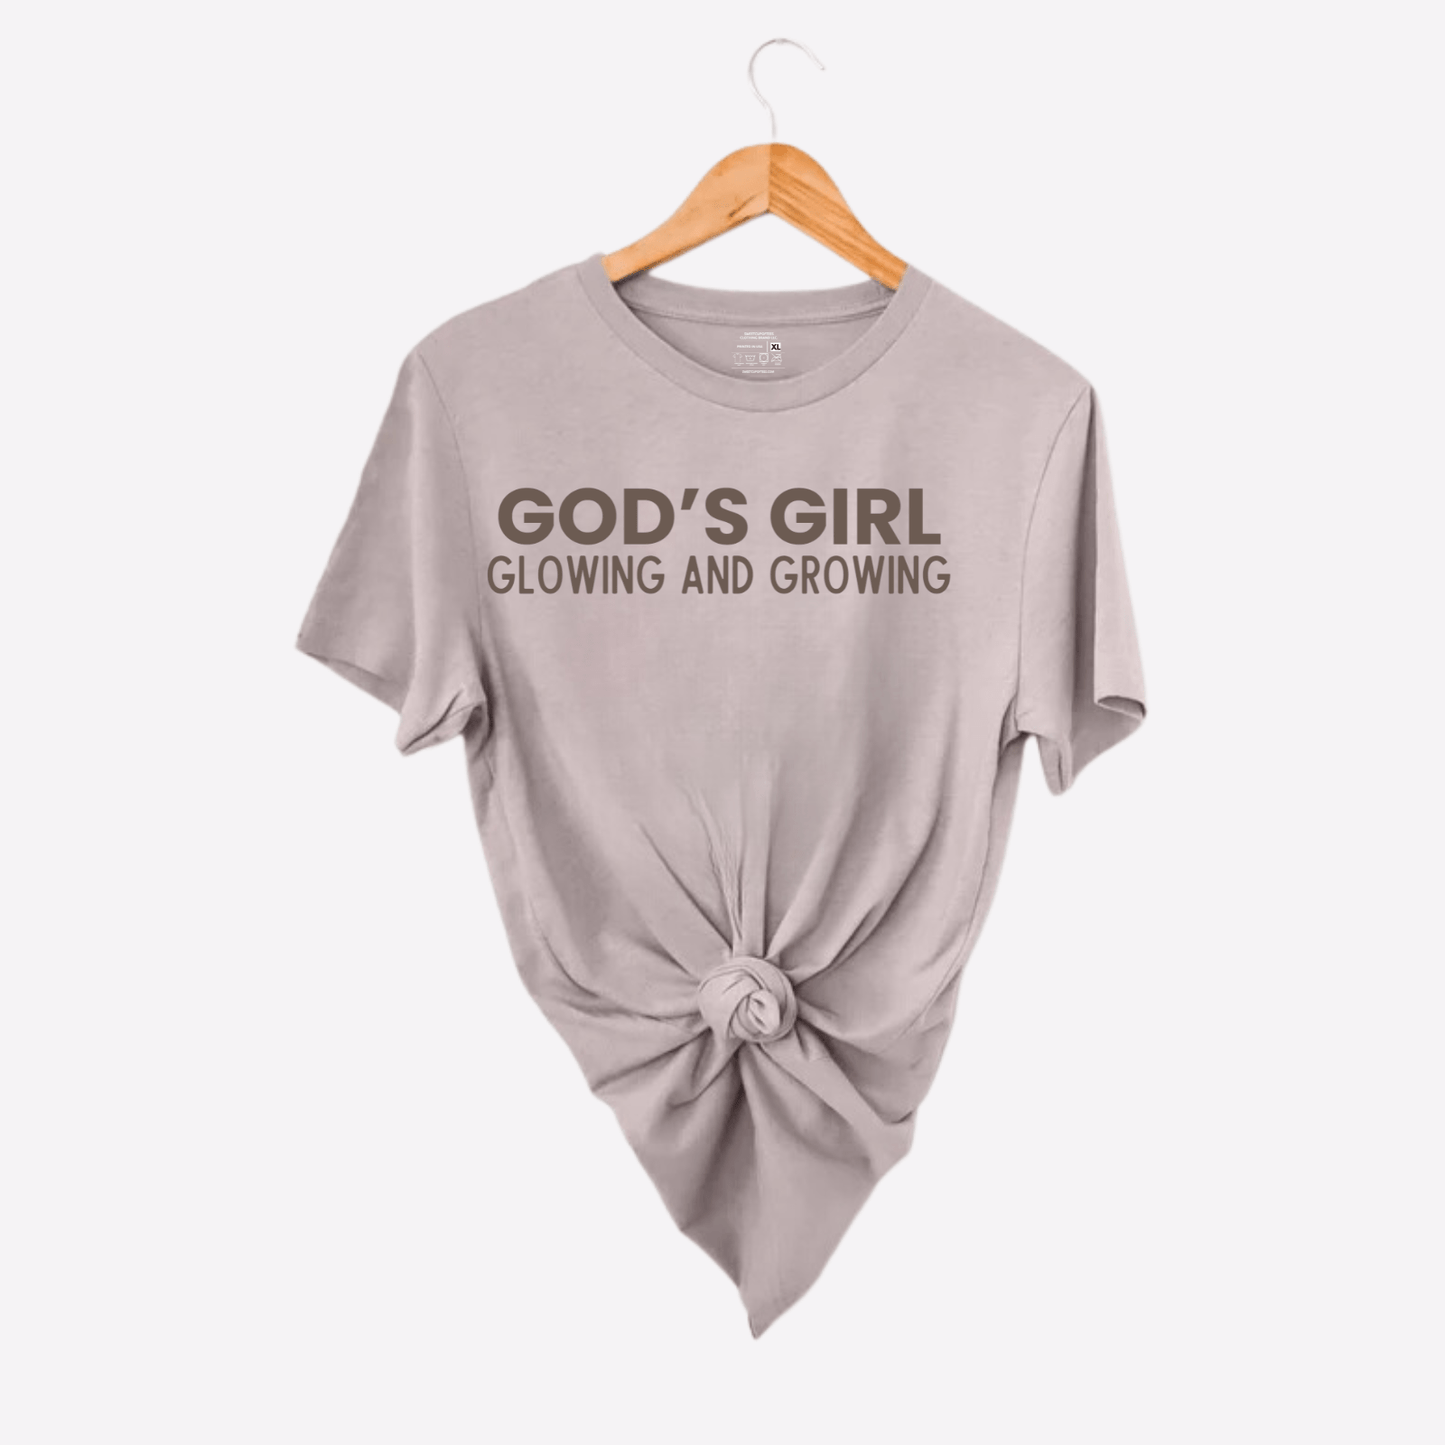 GOD'S GIRL GLOWING AND GROWING SHORT SLEEVE COTTON T - SHIRT - Sweetcupoftees